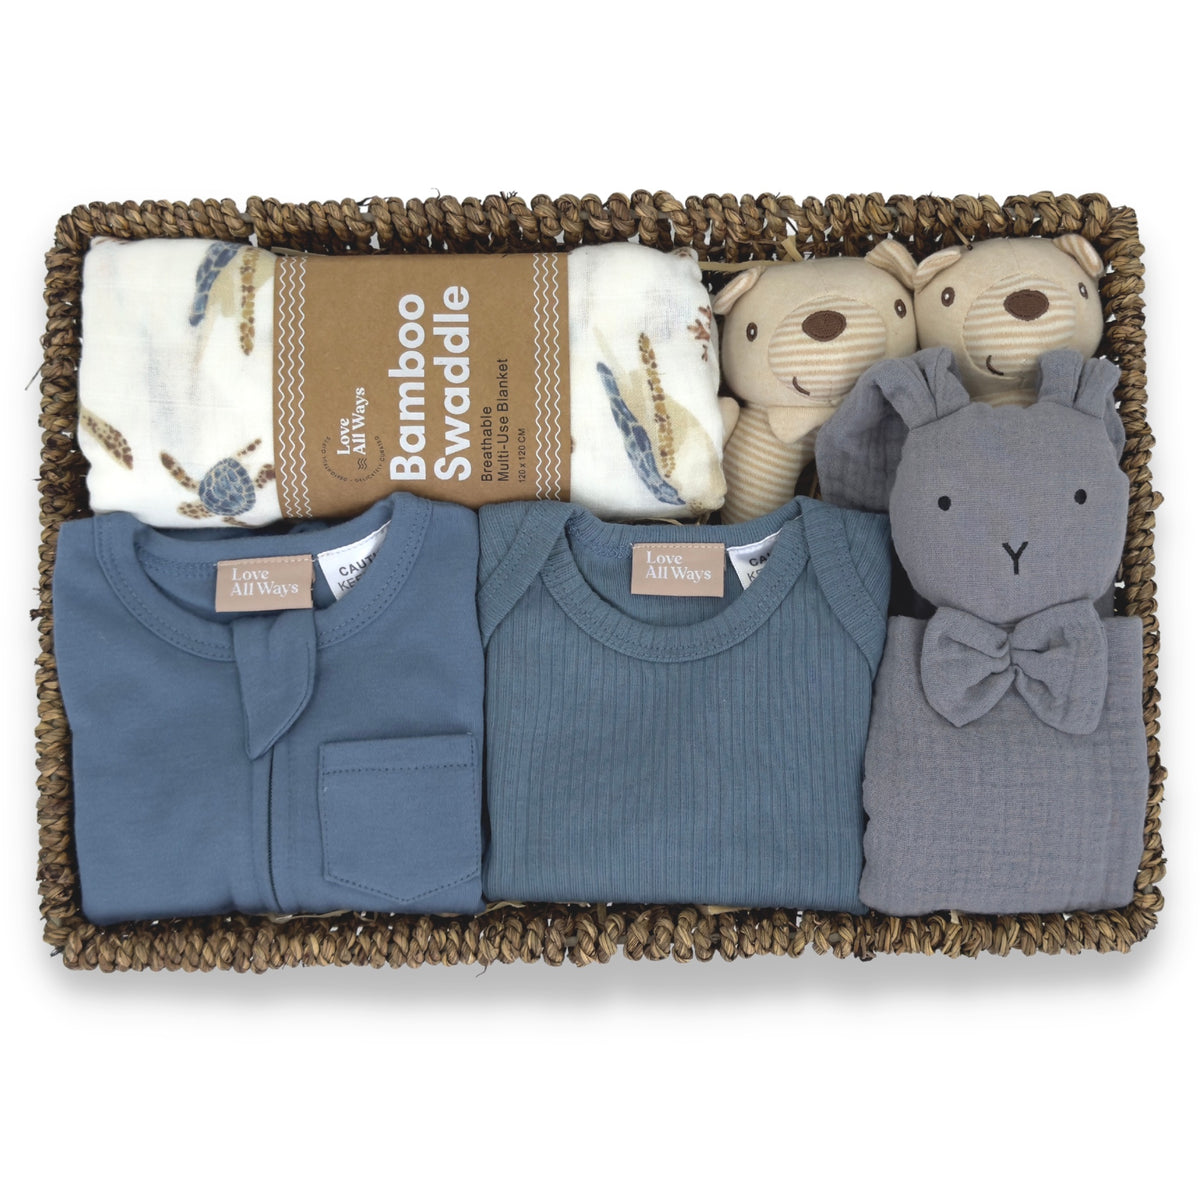 Explore our Signature Organic Baby Boy Gift Basket – the epitome of Love All Ways' commitment to ethical and sustainable values. Meticulously curated with essential core products for your little one's daily needs. Elevate your gifting experience with our thoughtful collection, beautifully packaged in a reusable seagrass display. Shop now!